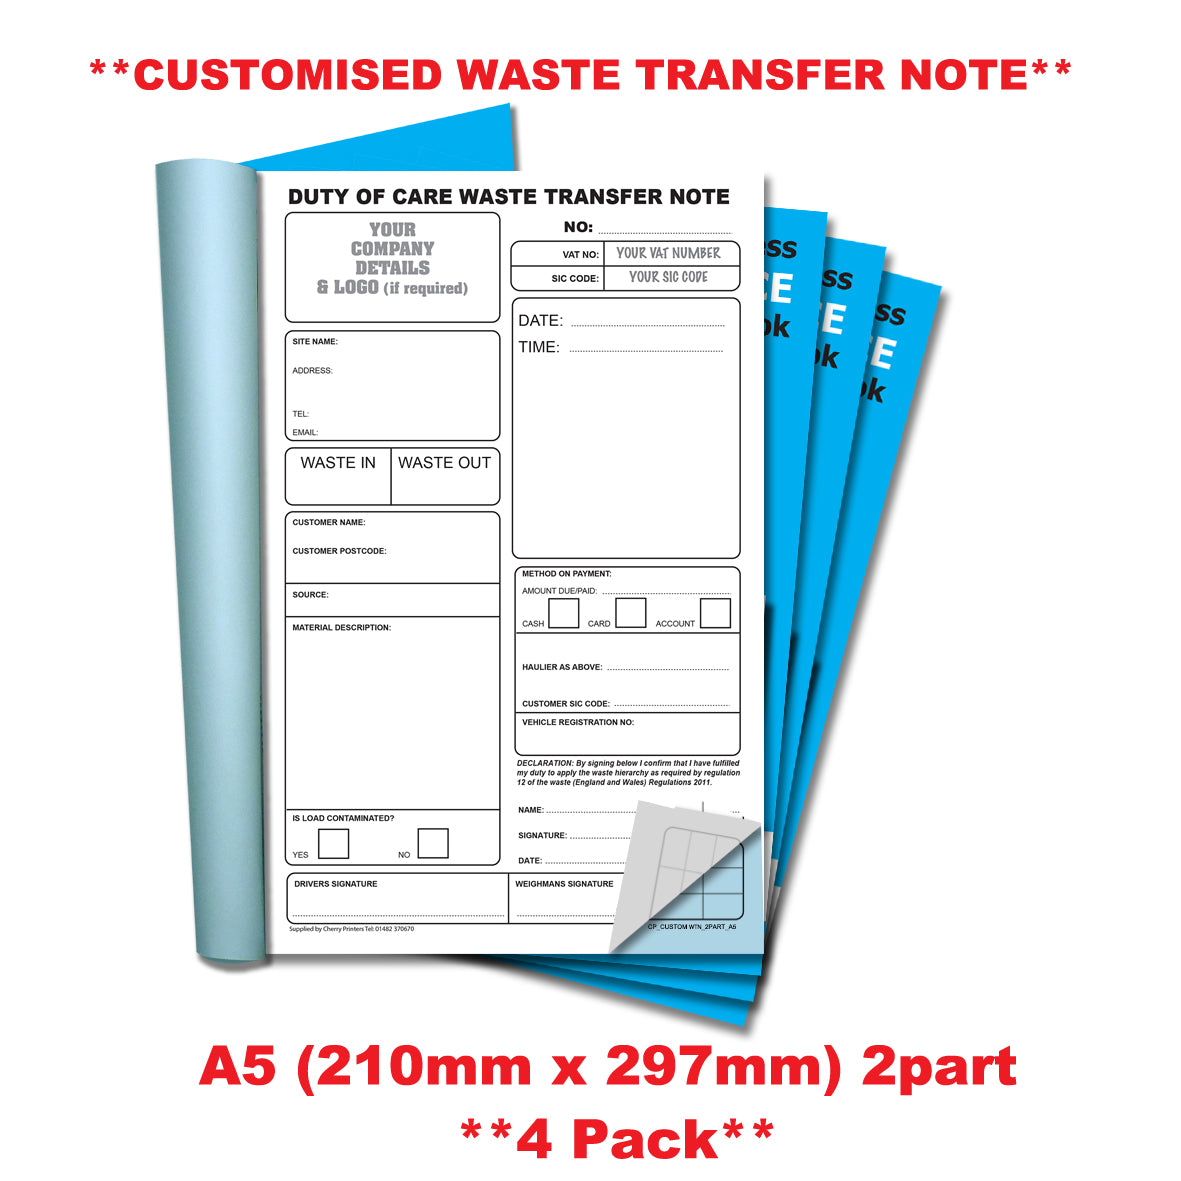 Duty of Care Waste Transfer Notes - A4 personalised 3-part